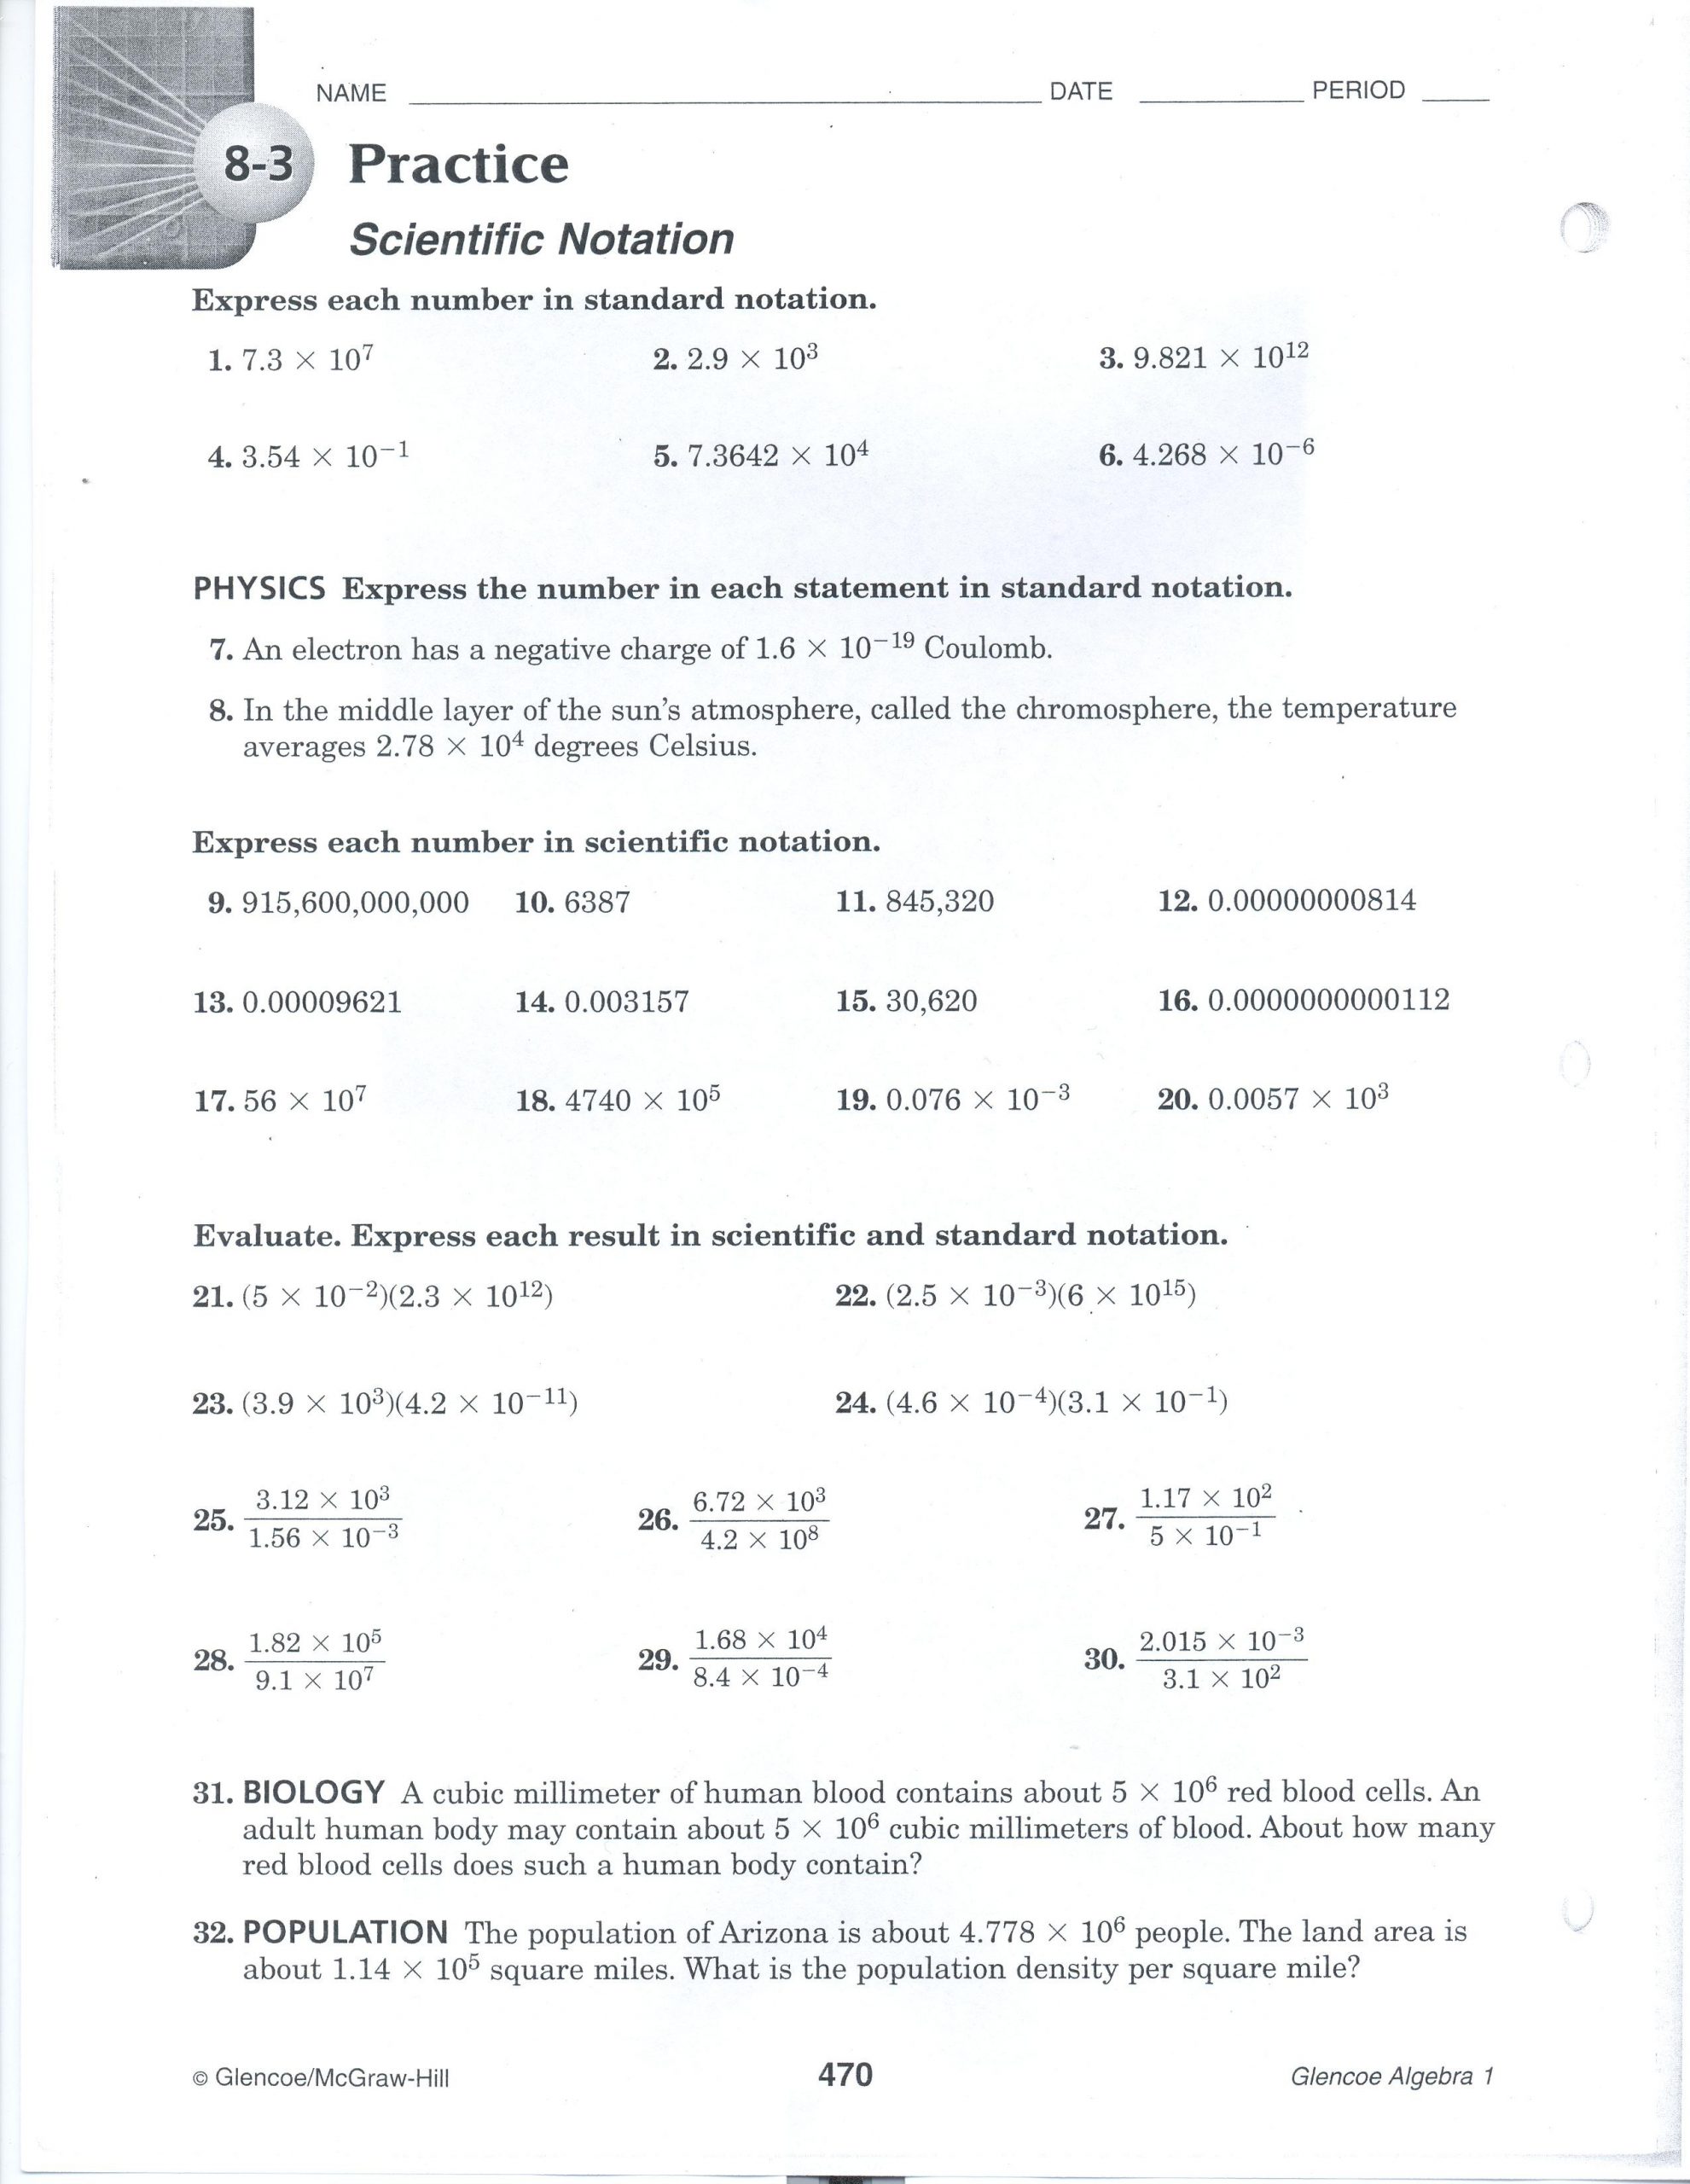 Scientific Notation Worksheet with Answers Scientific Notation Printable Worksheet